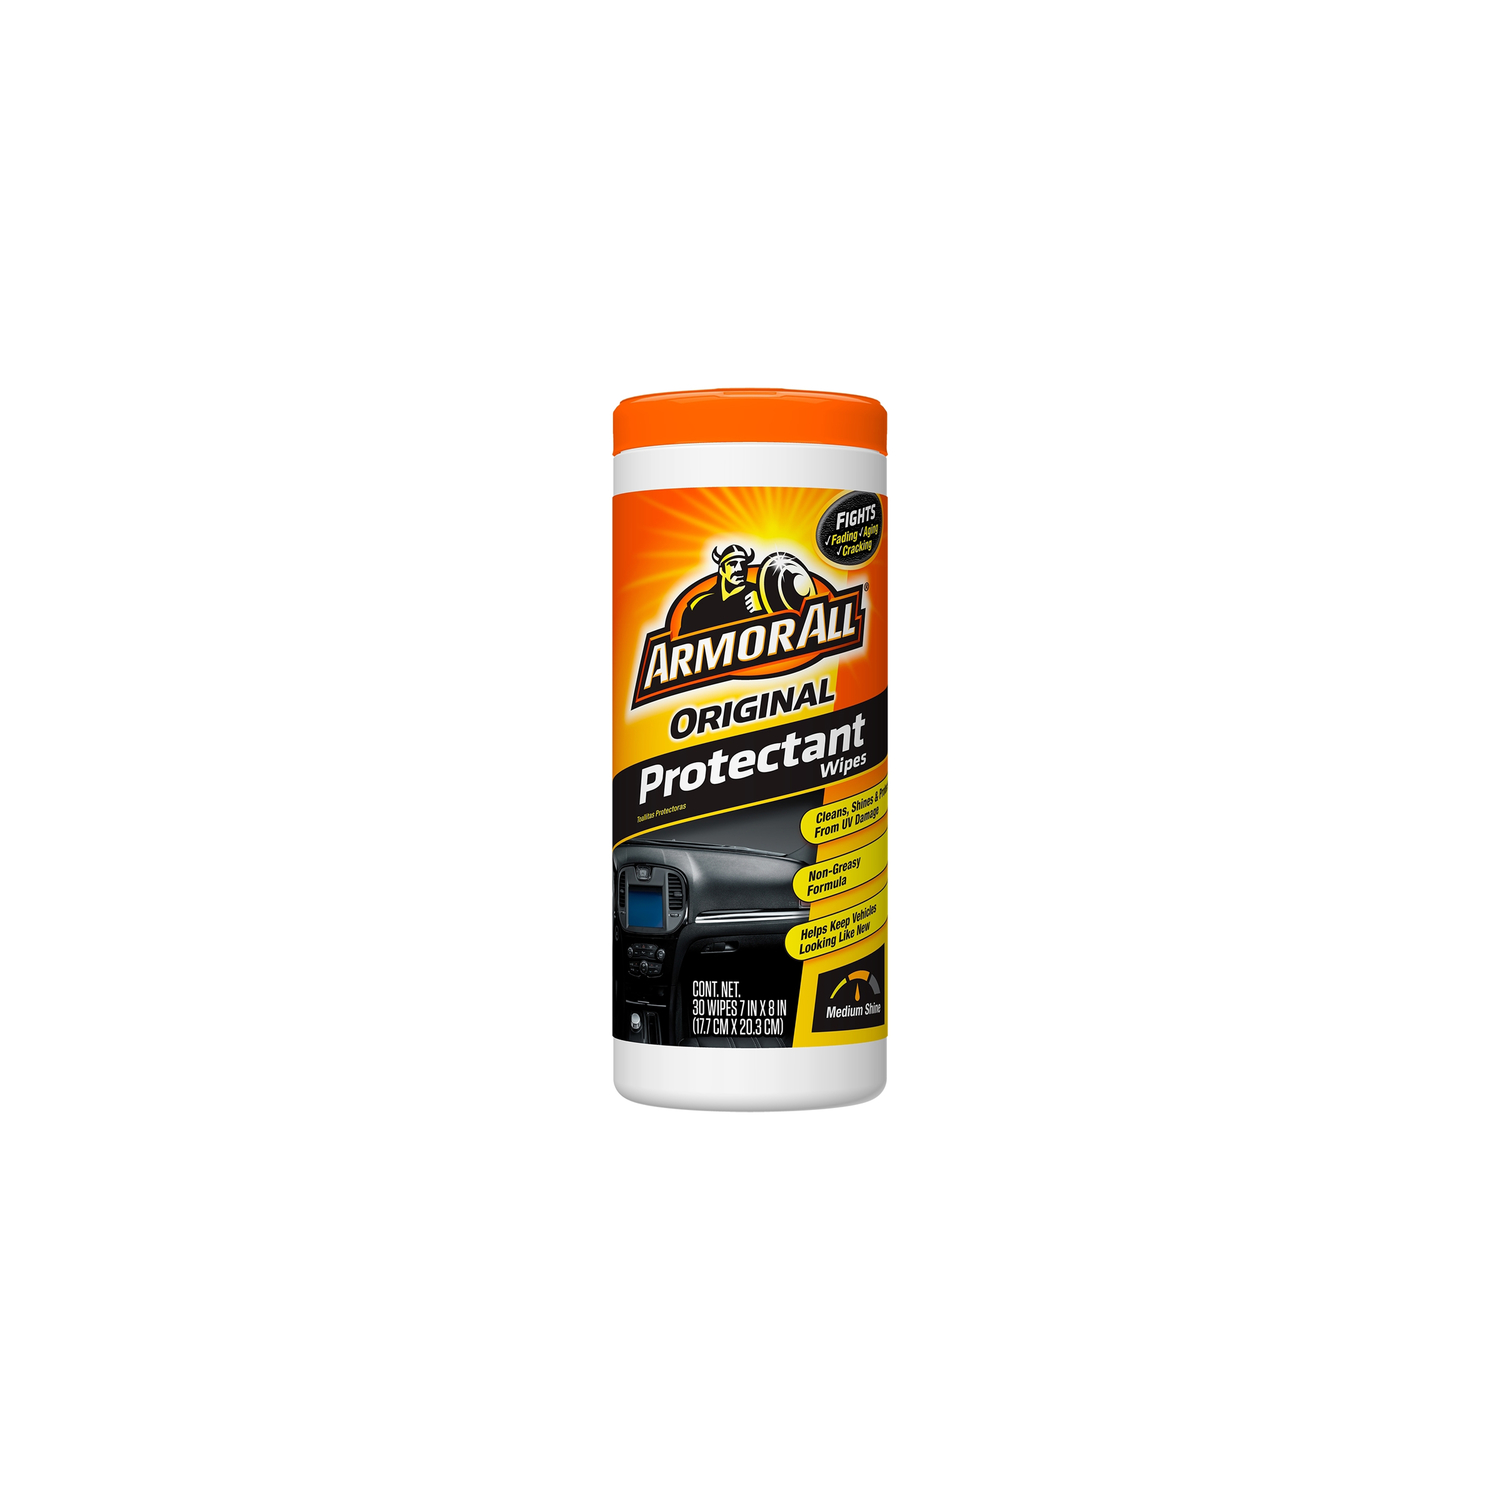 Photos - Battery Armor All Original Plastic/Rubber/Vinyl Protectant Wipes 30 wipes 17496C 